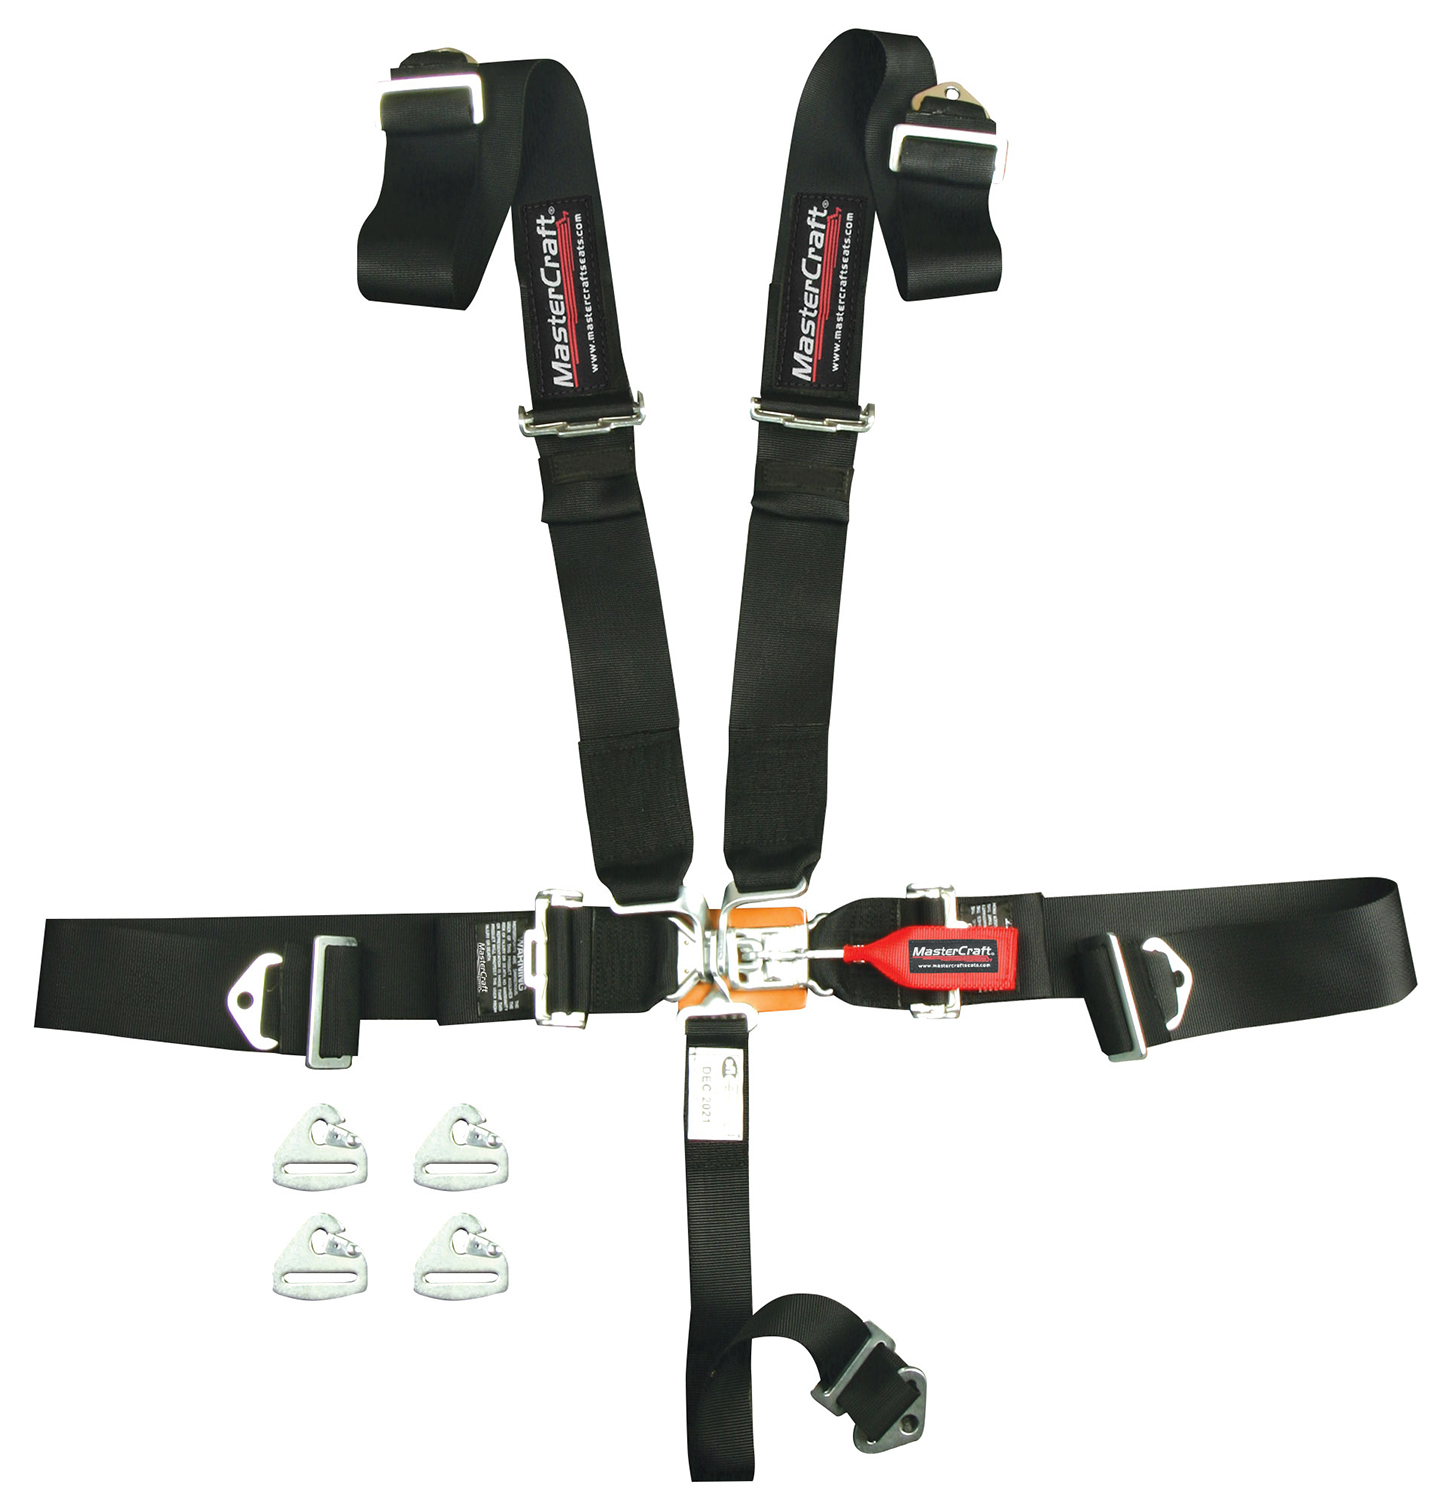 Mastercraft 115214 Harness, 5 Point, Latch and Link, SFI 16.1, Snap-On, 3 in Straps, Pull Down Adjust, Individual Harness, Black, Kit